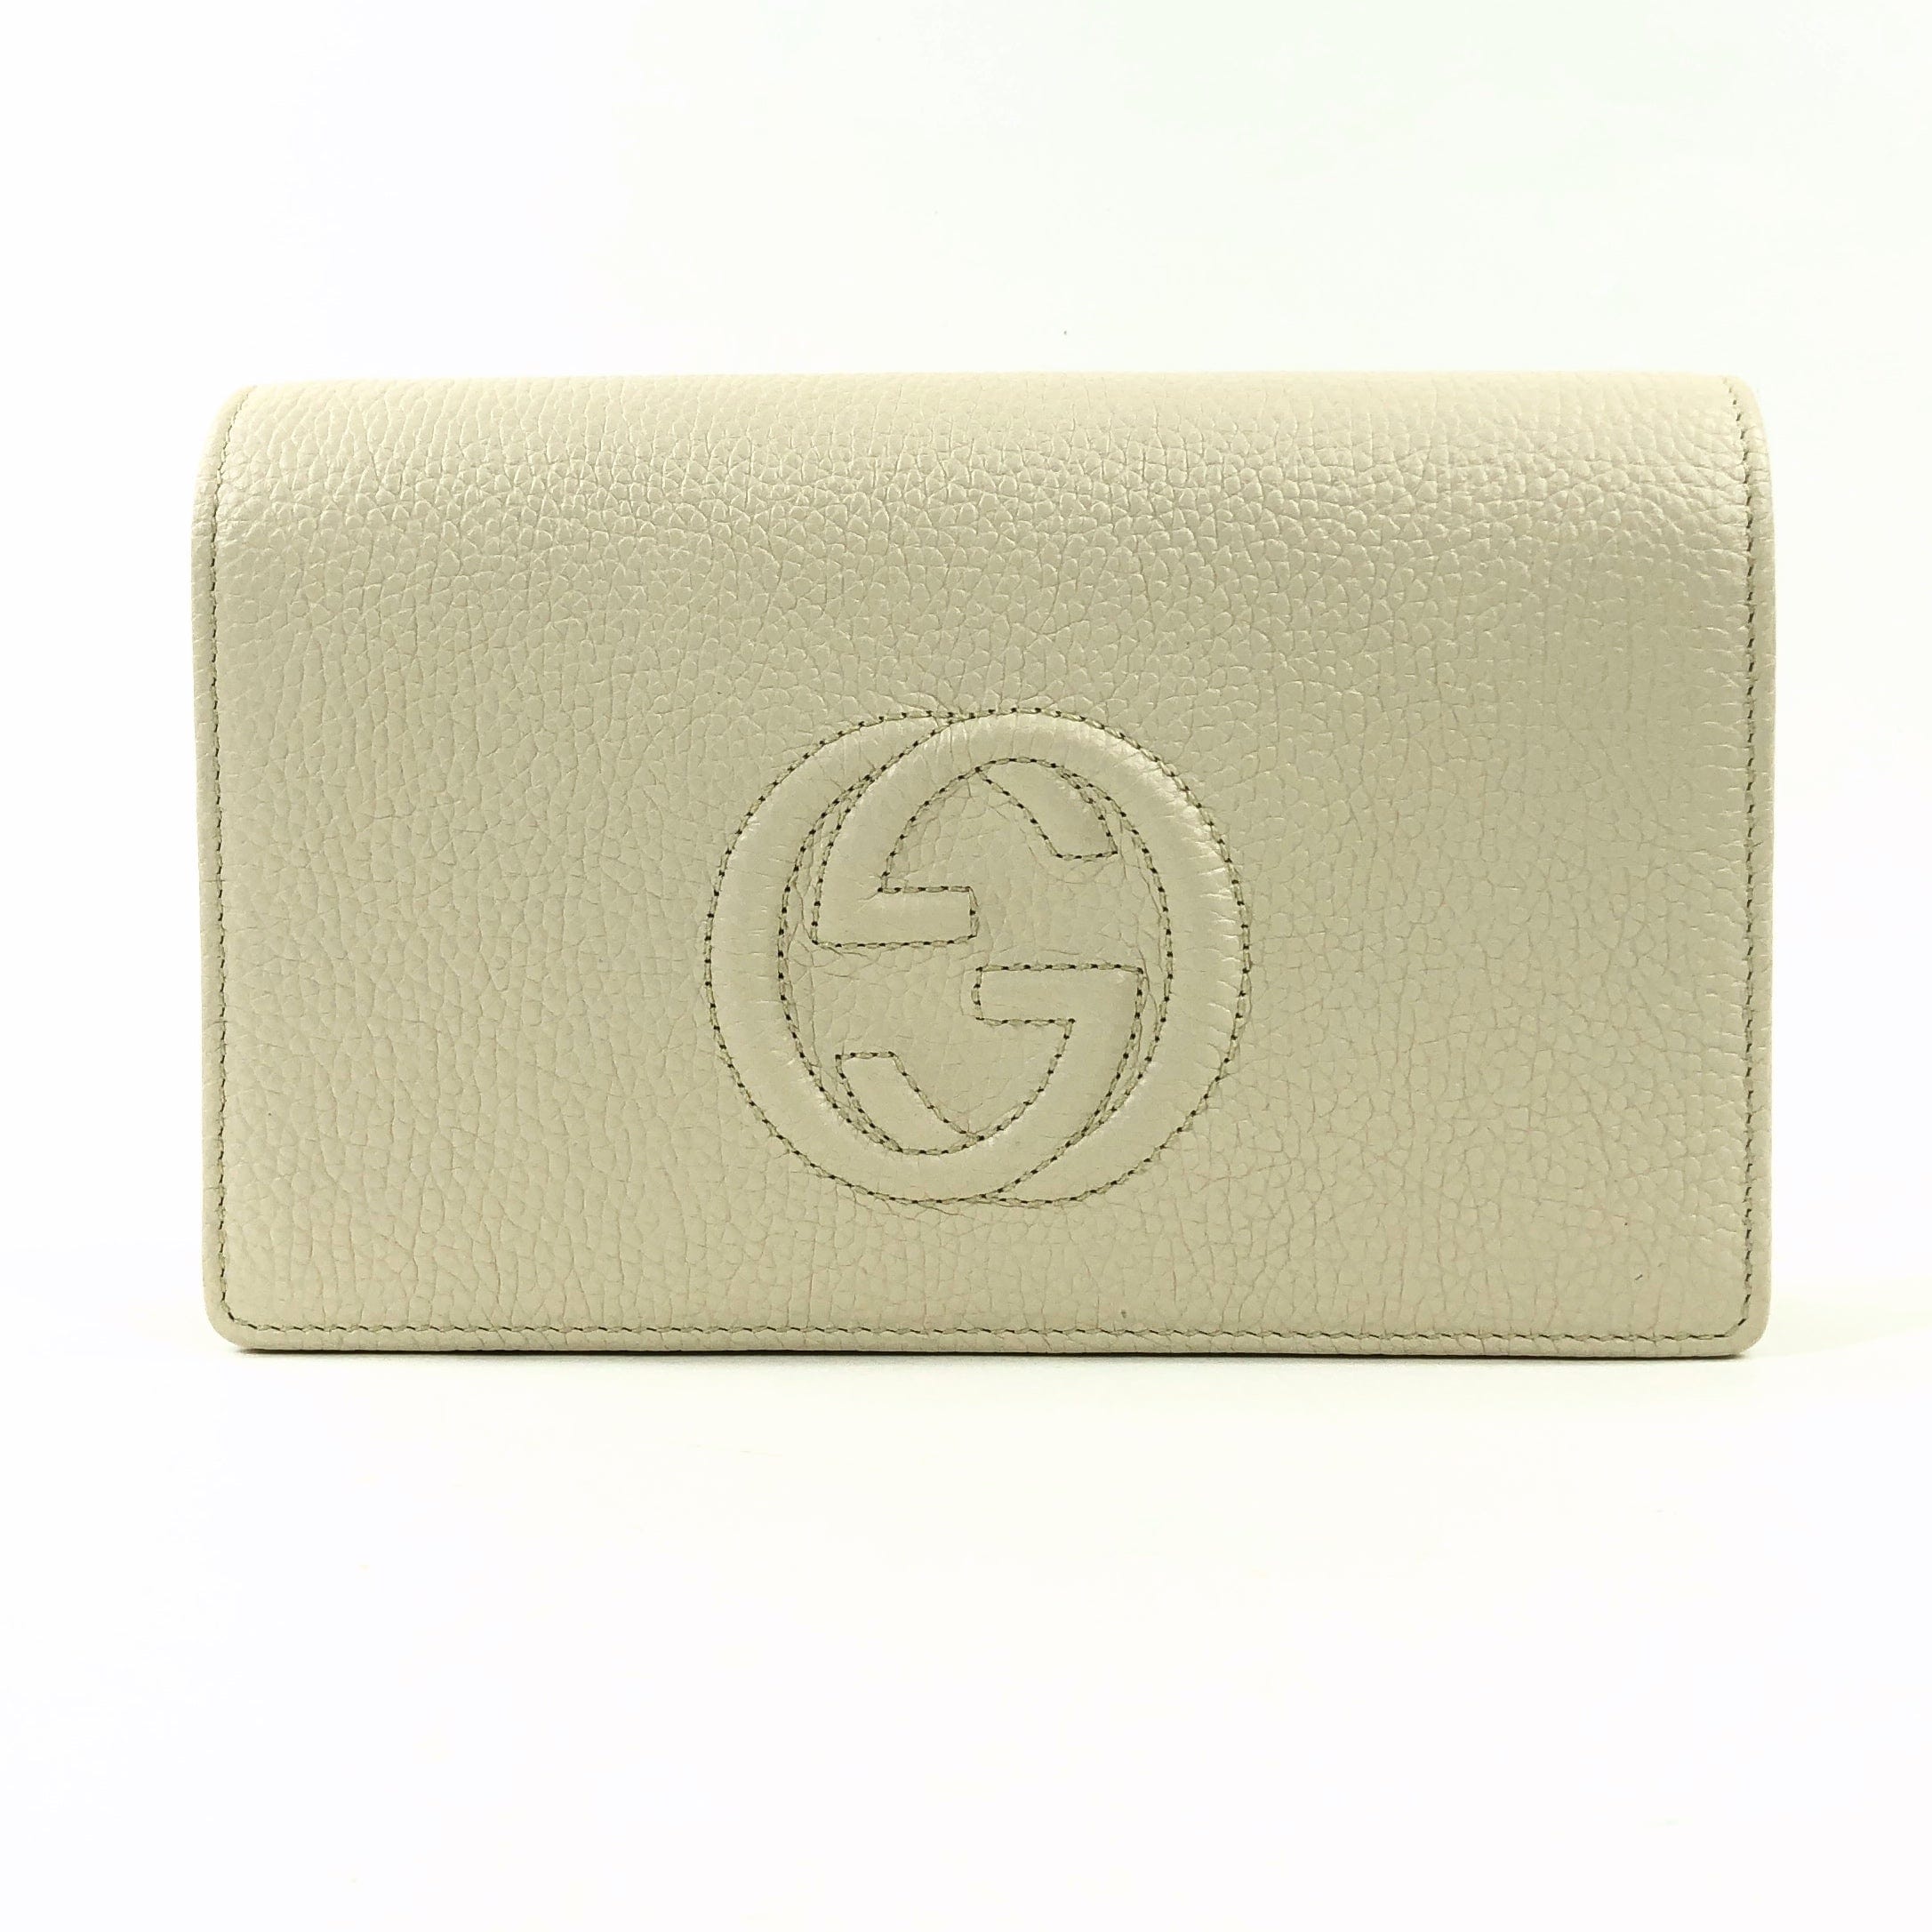 Gucci Leather Chain Shoulder Bag White 3993724